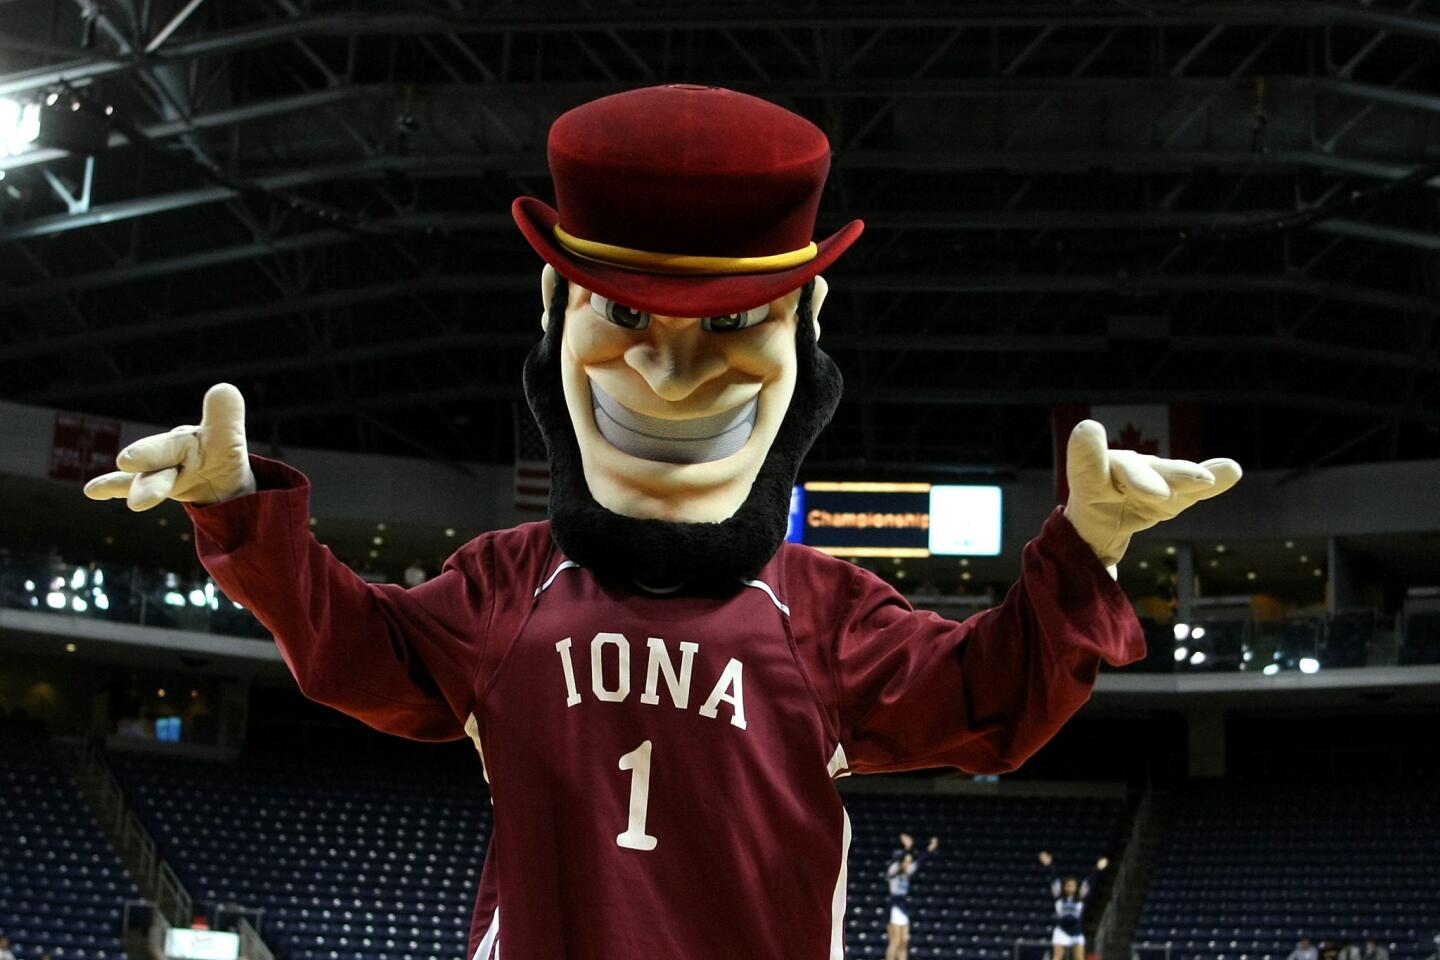 Iona’s nickname is the Gaels, a nod to the New Rochelle, NY, school’s founders, the Irish Christian Brothers. The school website describes Killian as “spunky,” but the adjective that more likely comes to mind for most people would be “deranged.”